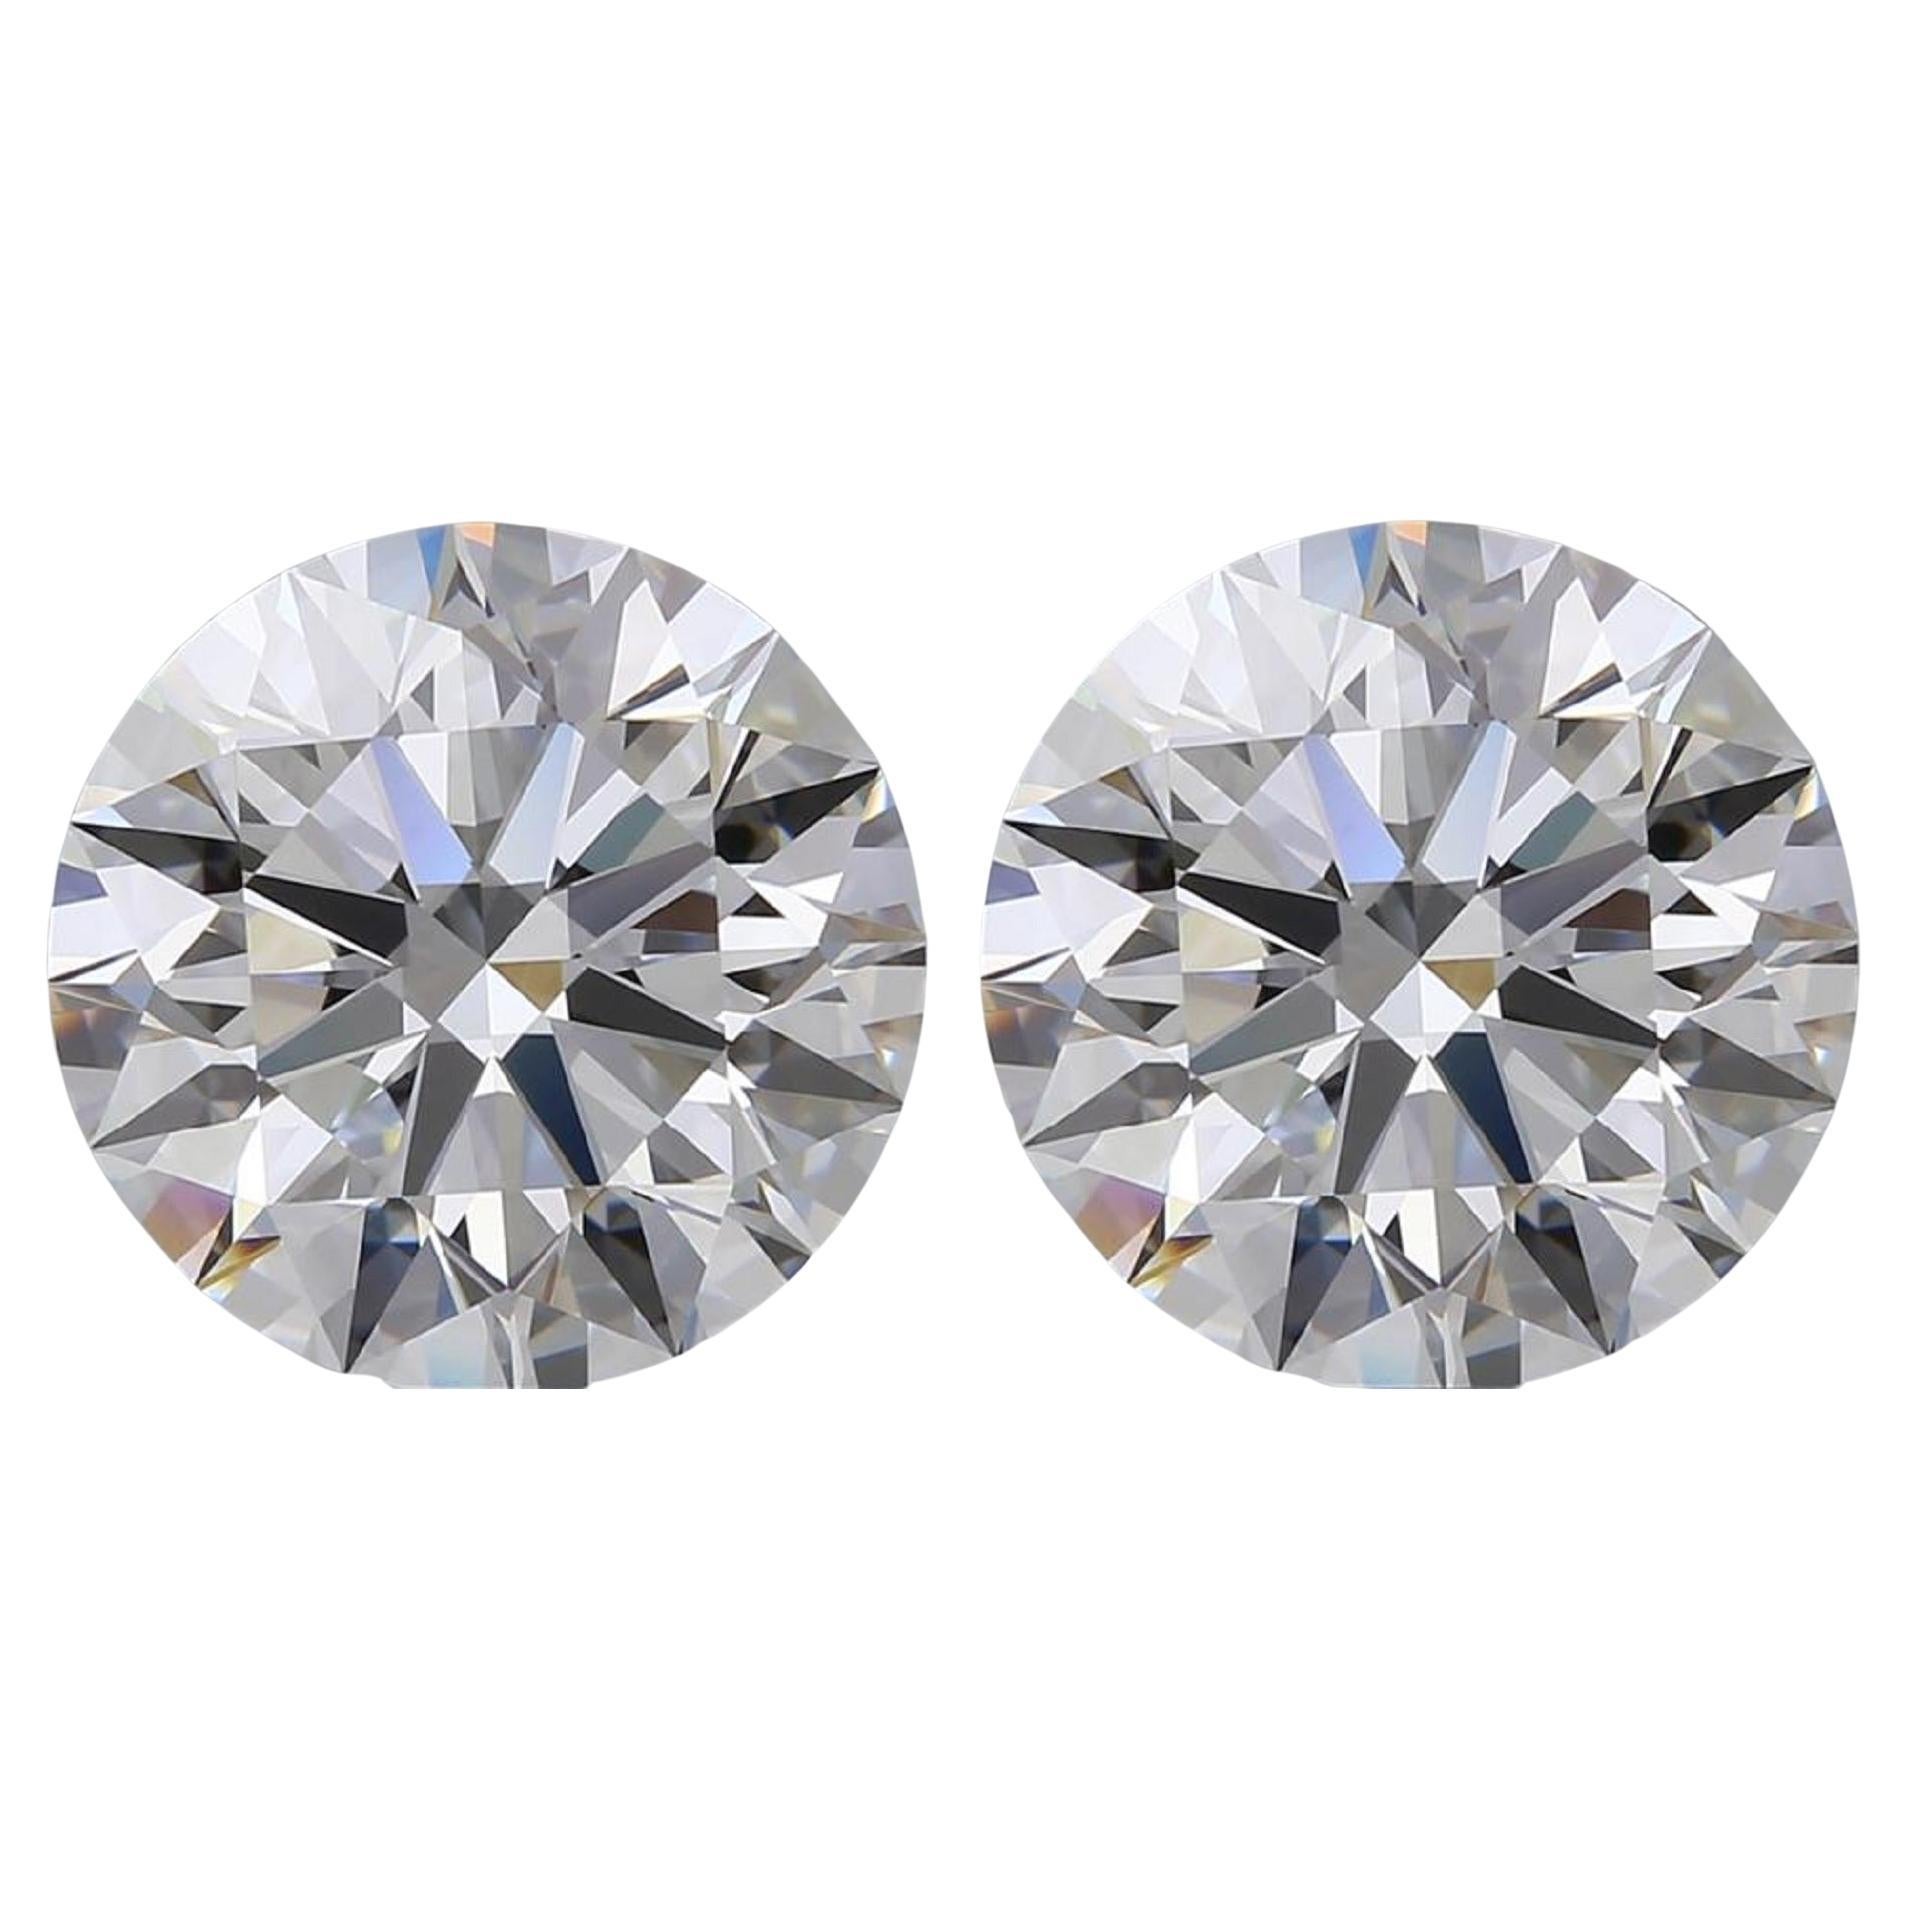 Fantastic matched pairs of Natural Round Brilliant Cut Diamond Studs classified by the GIA as FLAWLESS for Clarity and F for Color.
Each diamonds weight 2 Carat, for a 4 Carat total weight.
